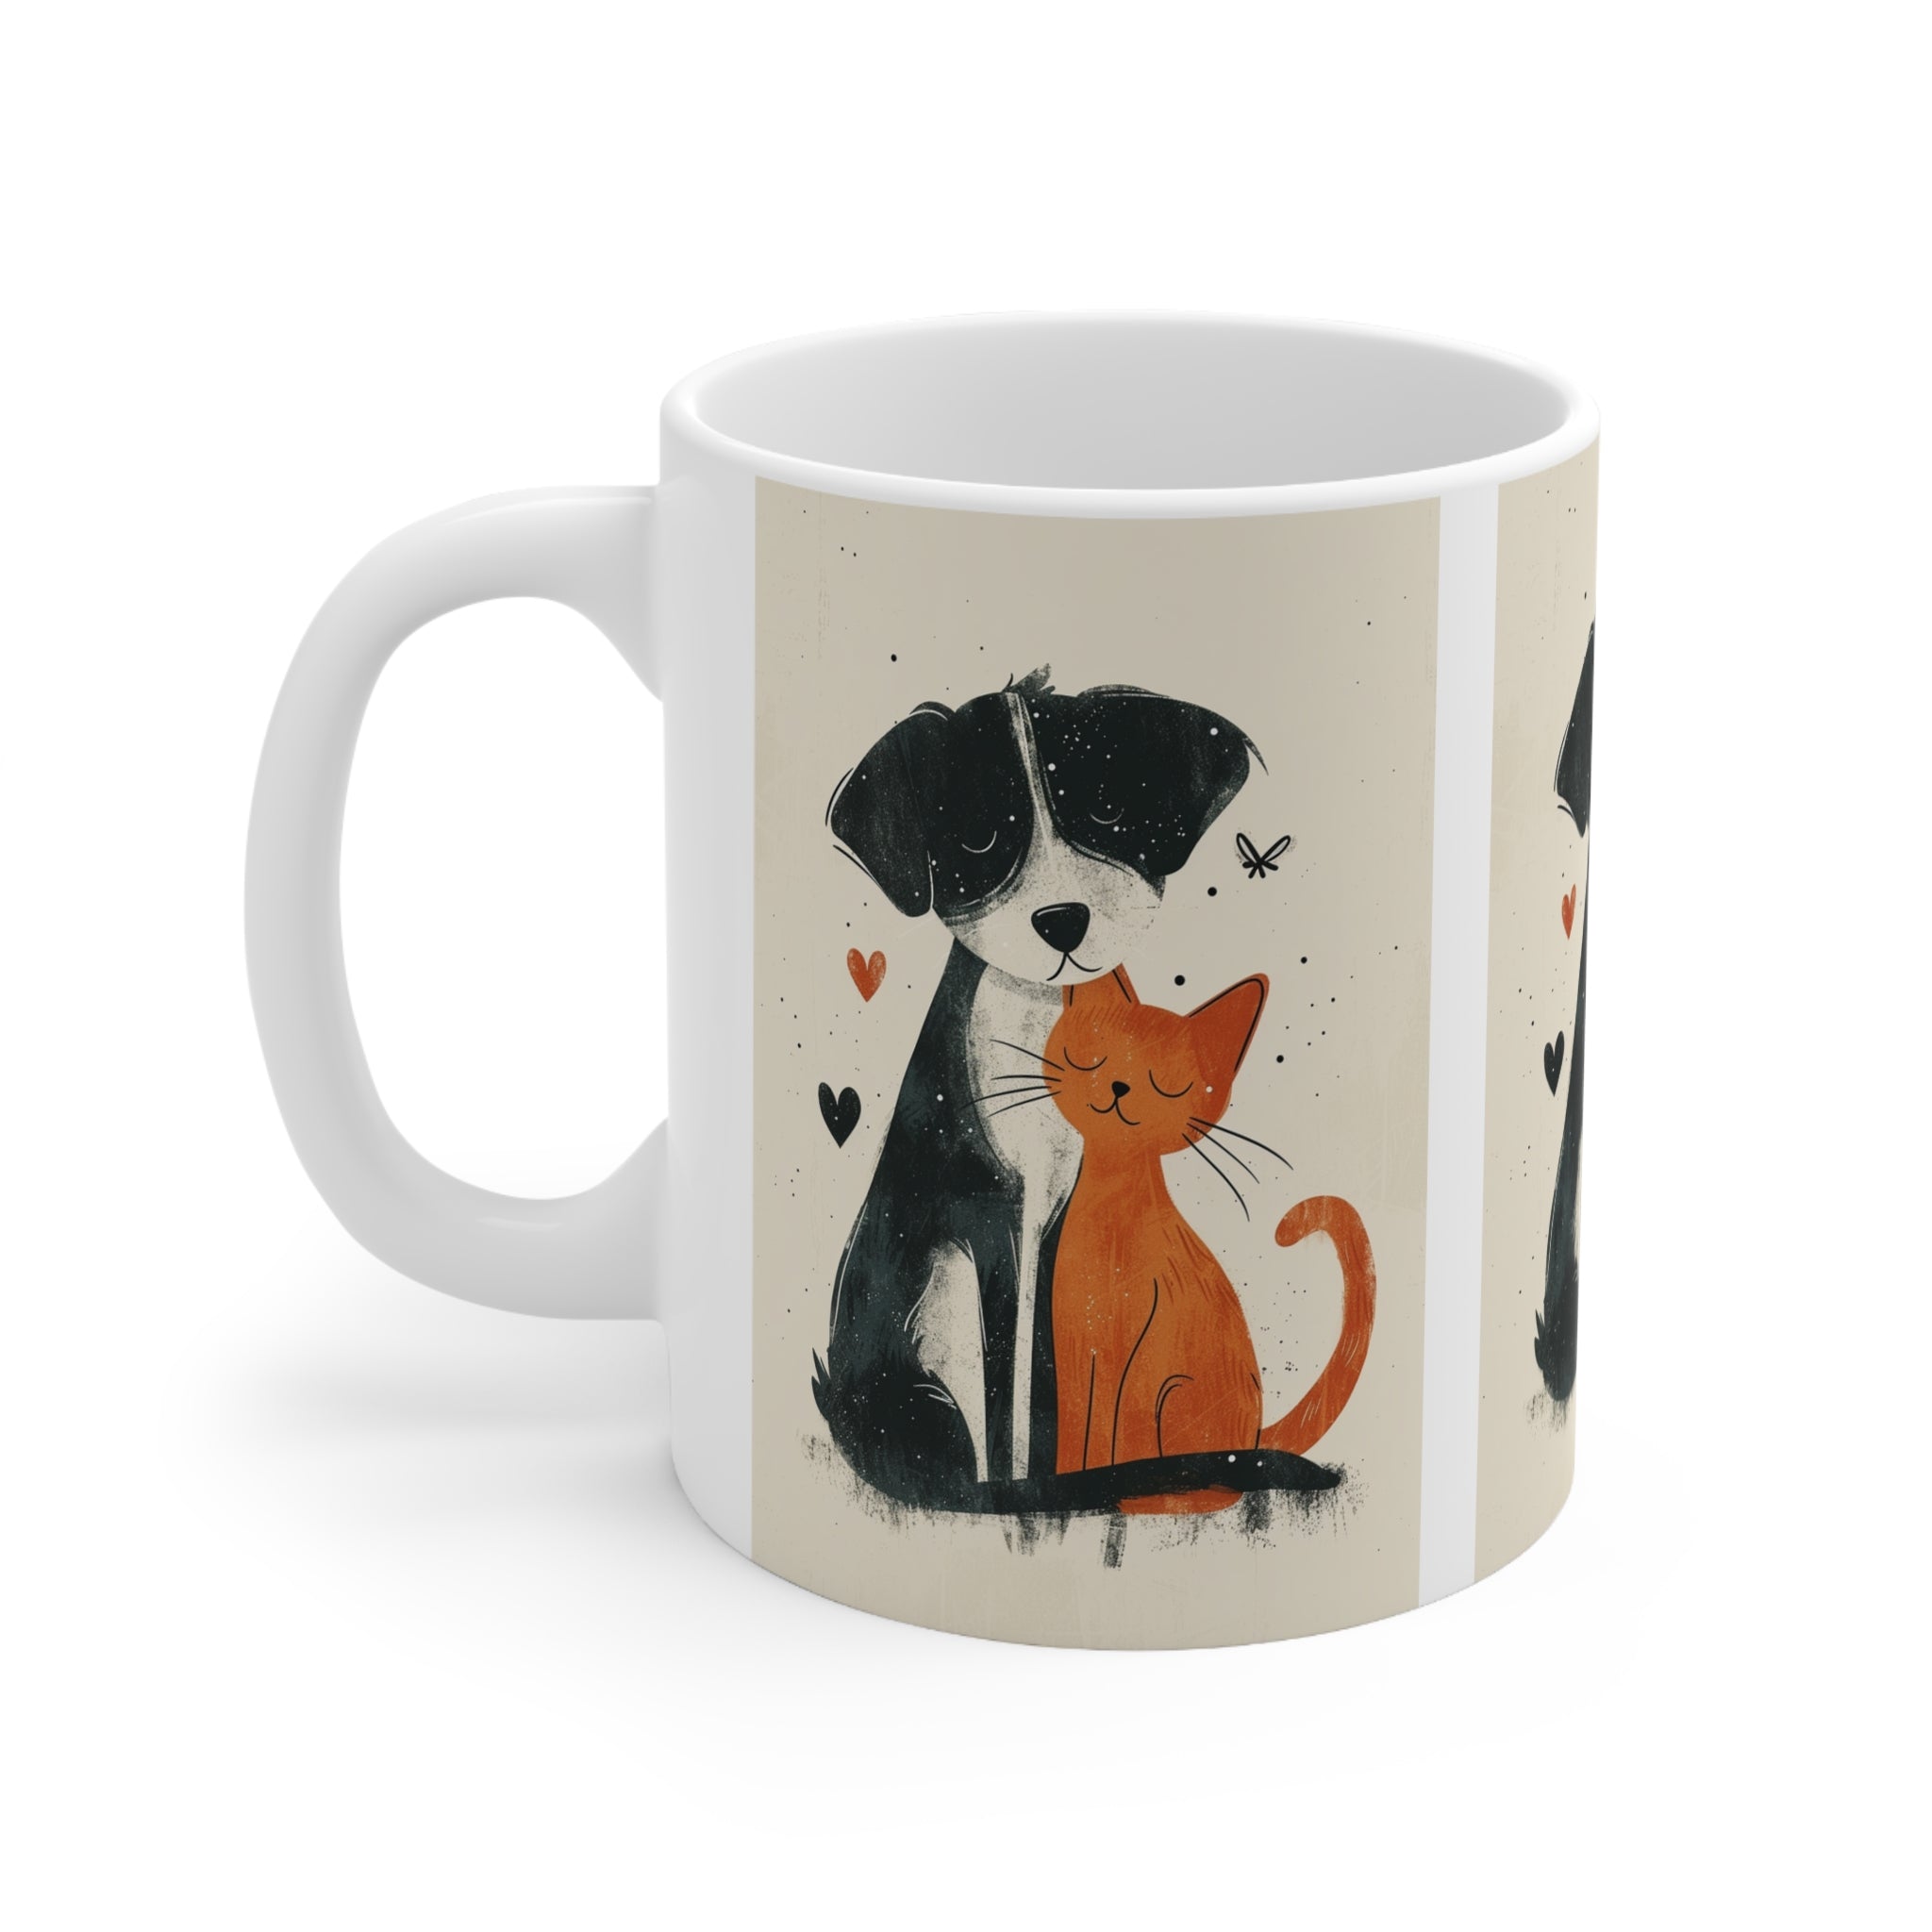 Feline and Canine Best Mates Ceramic Mug 11oz - Adorable Cat and Dog Friendship Coffee Cup Gift for Pet Owners and Animal Lovers Who Love Coffee